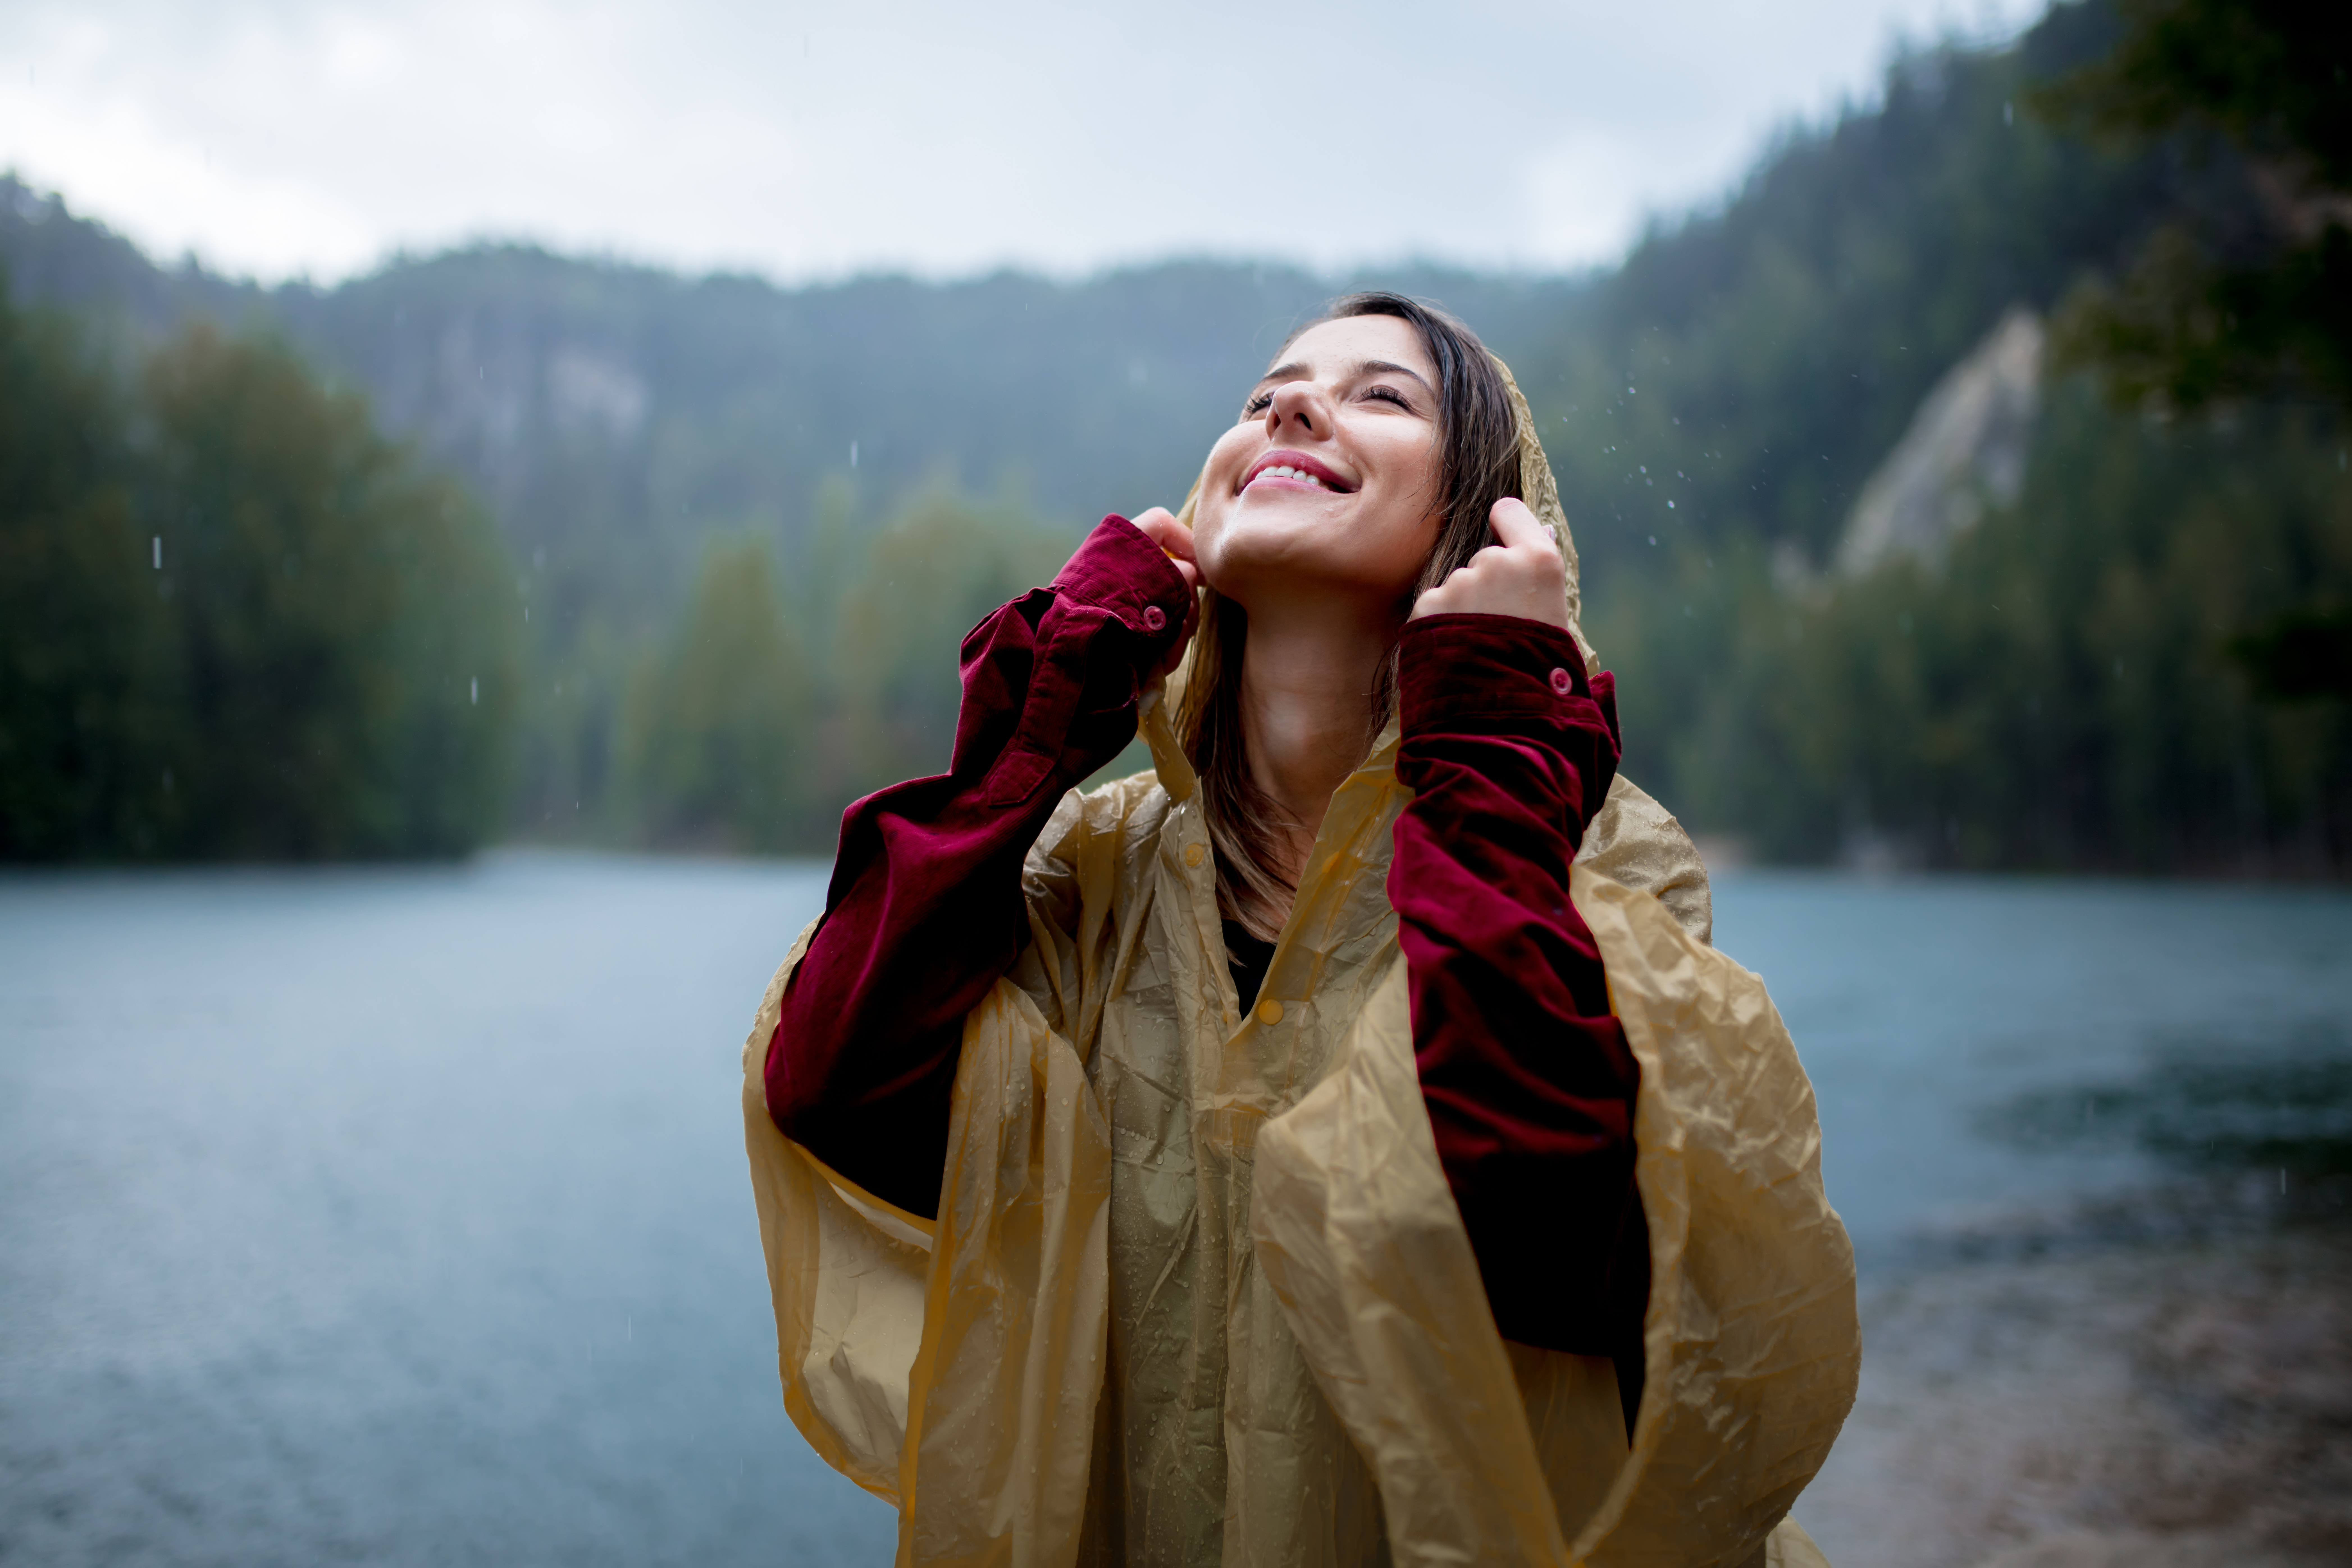 Young woman in raincoat near lake in rainy day.